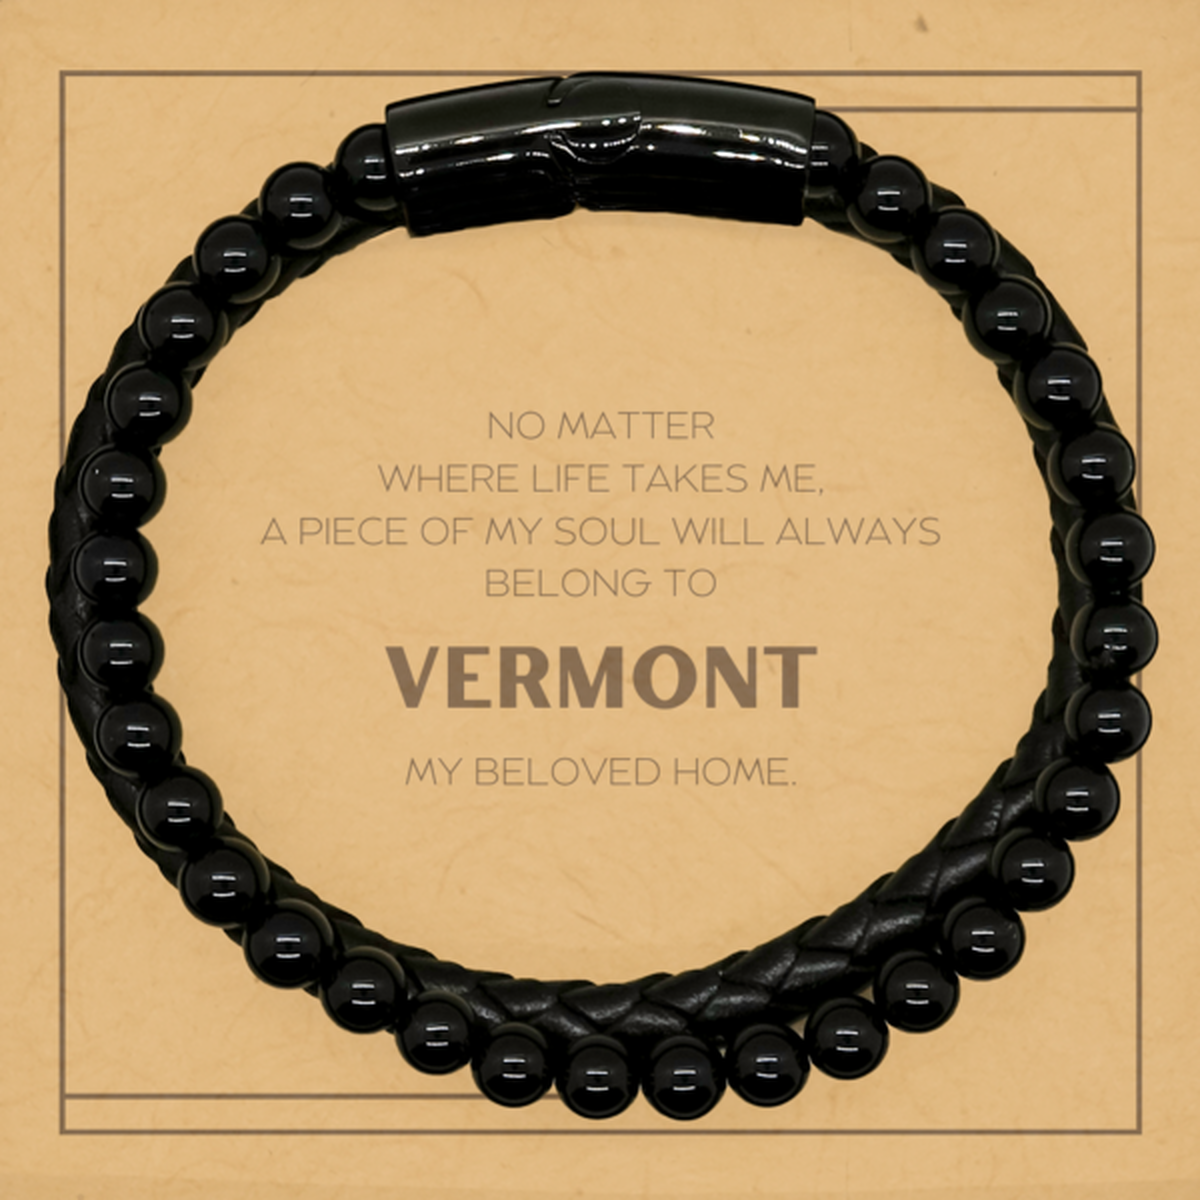 Love Vermont State Gifts, My soul will always belong to Vermont, Proud Stone Leather Bracelets, Birthday Unique Gifts For Vermont Men, Women, Friends